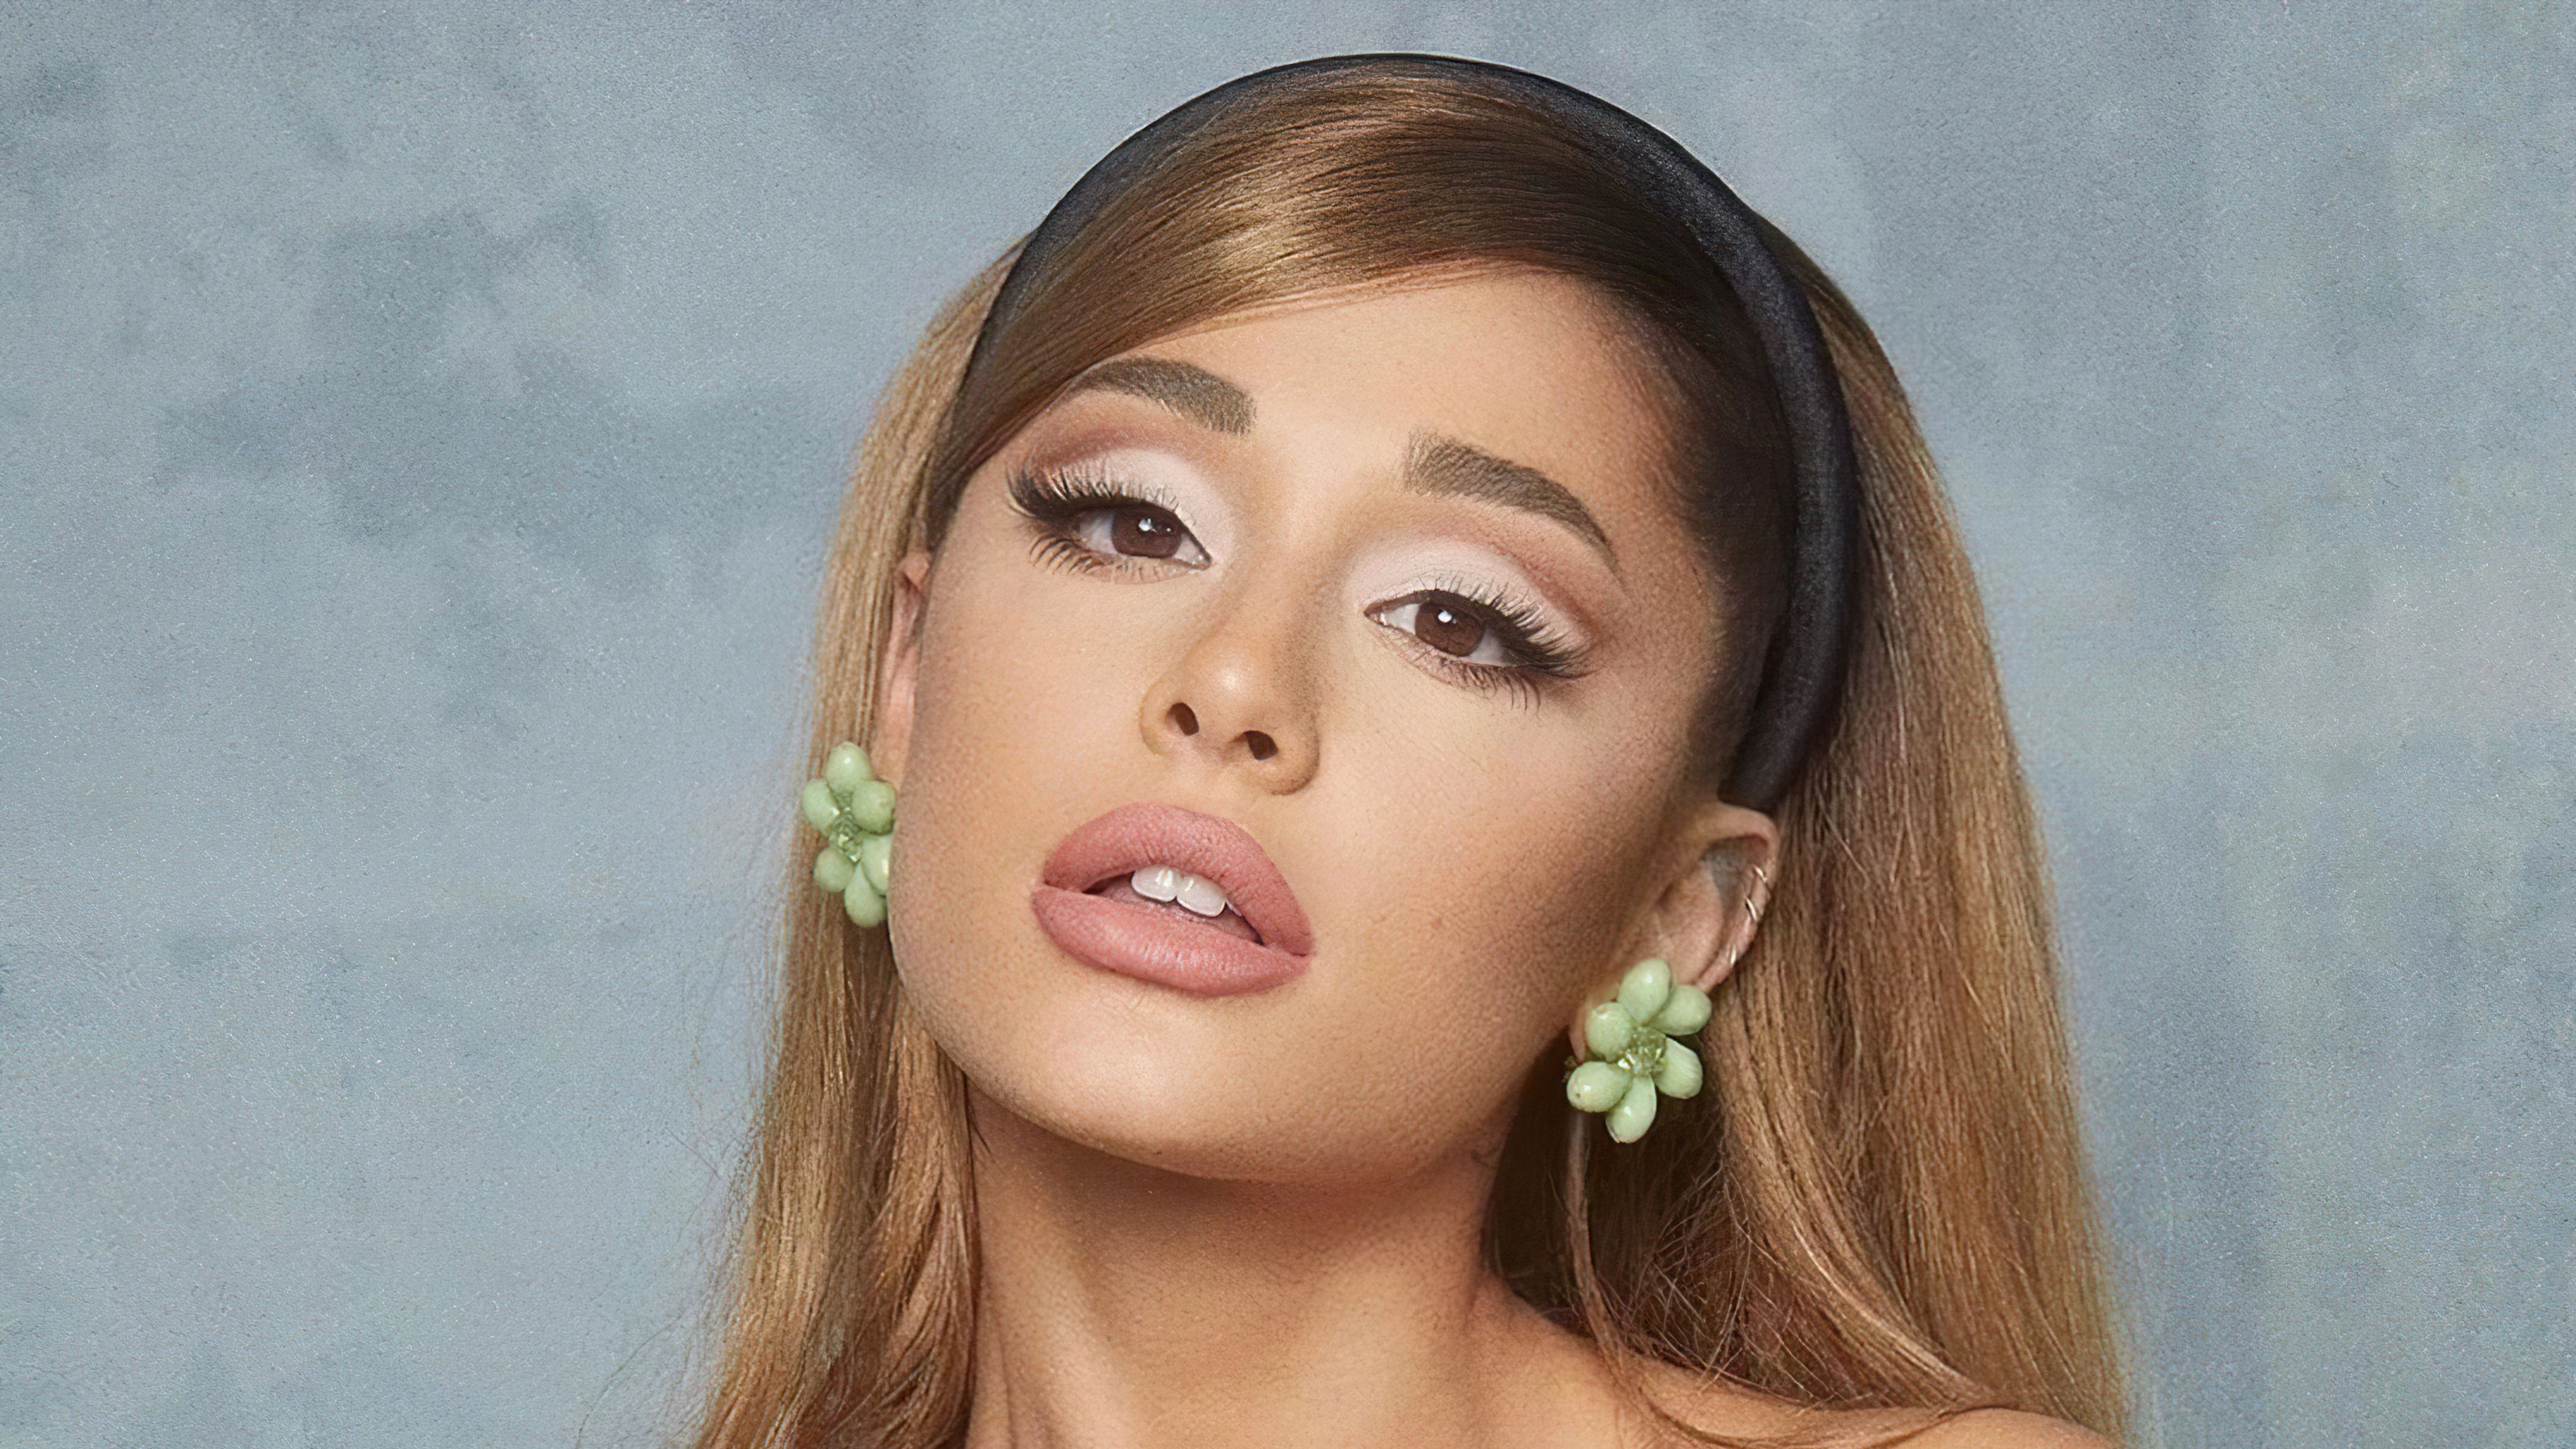 Ariana Grande Dave Meyers Photohoot, HD Music, 4k Wallpaper, Image, Background, Photo and Picture